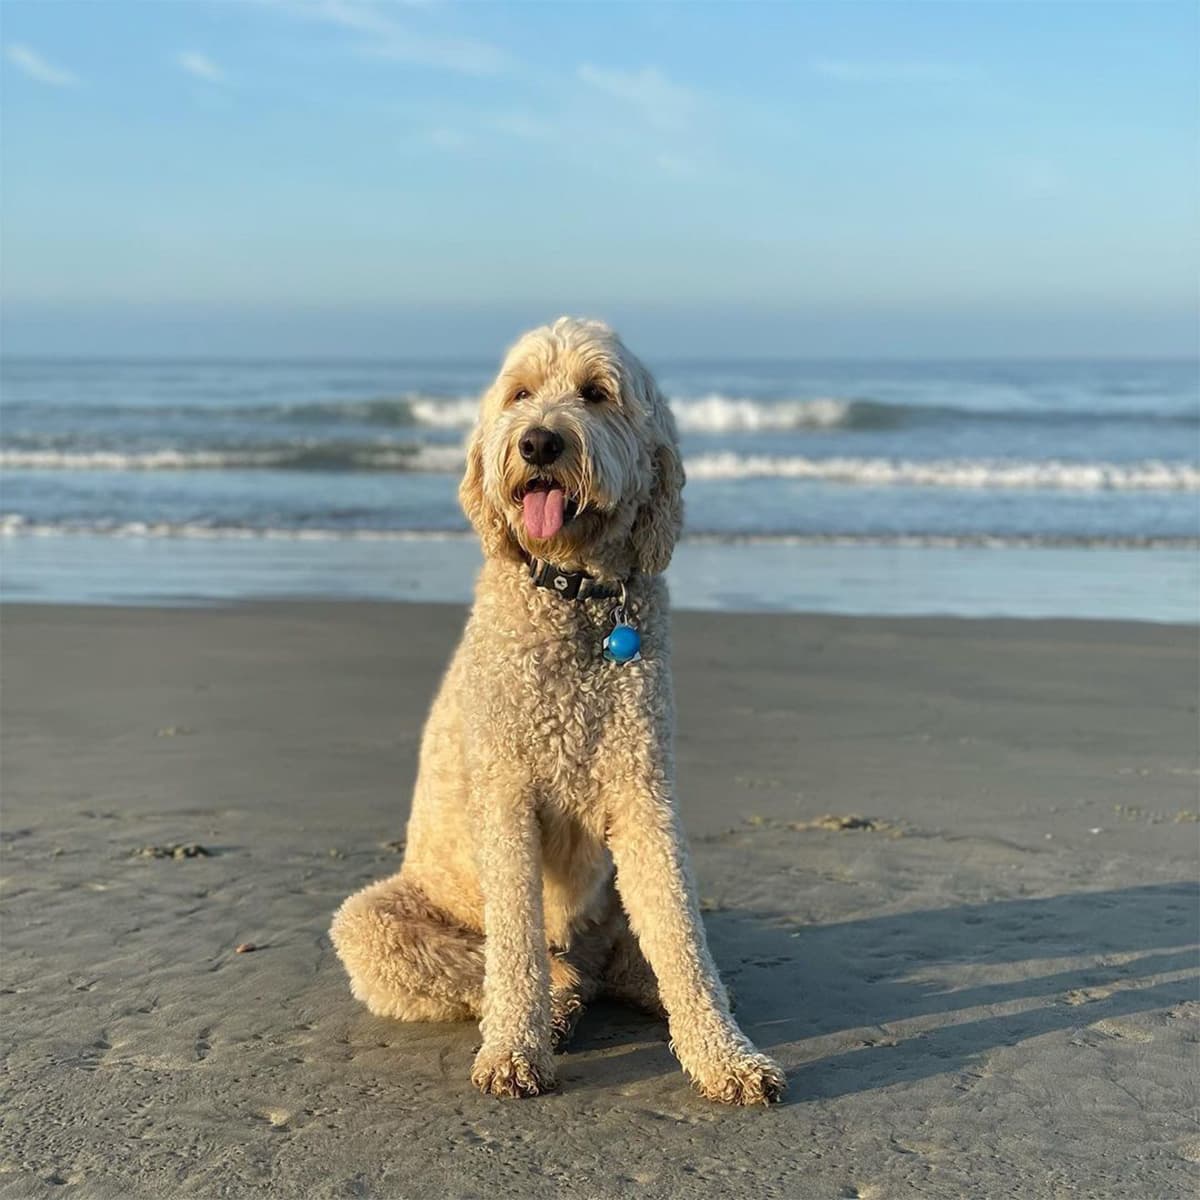 Goldendoodle sticking tongue out and sitting on a beach with the ocean in the background